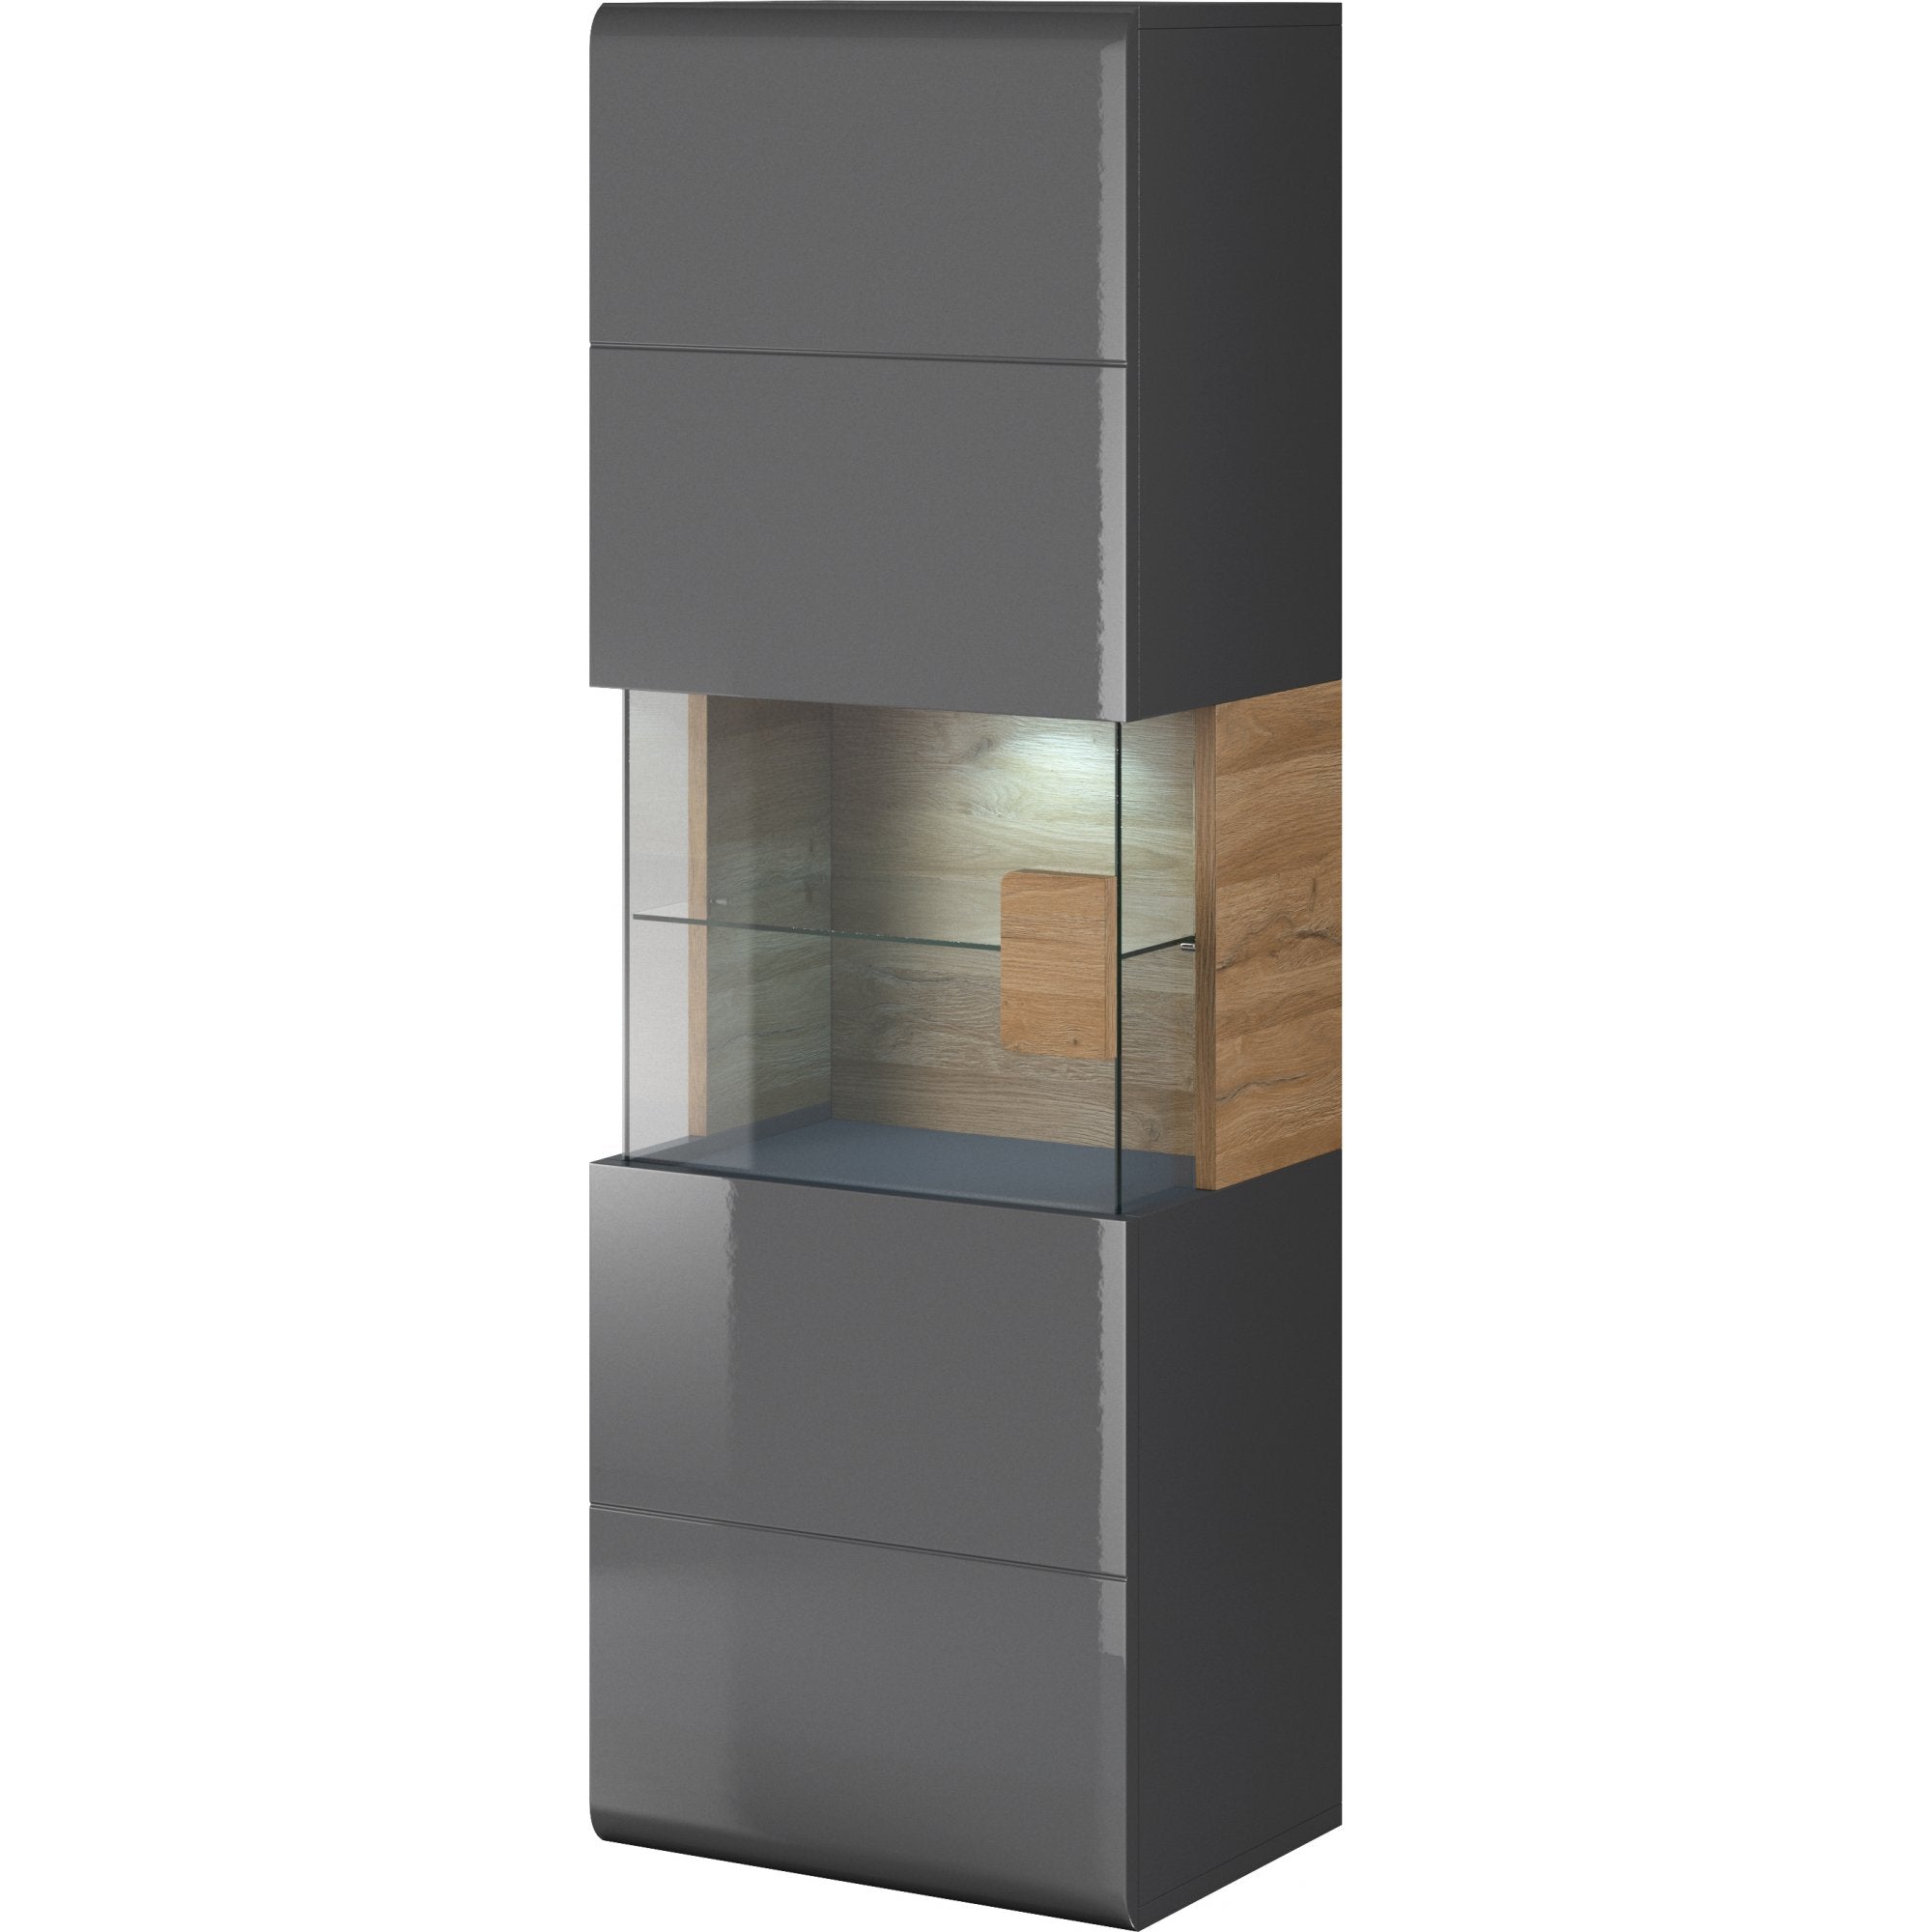 View Toledo 07 Wall Hung Cabinet Grey Gloss 53cm information